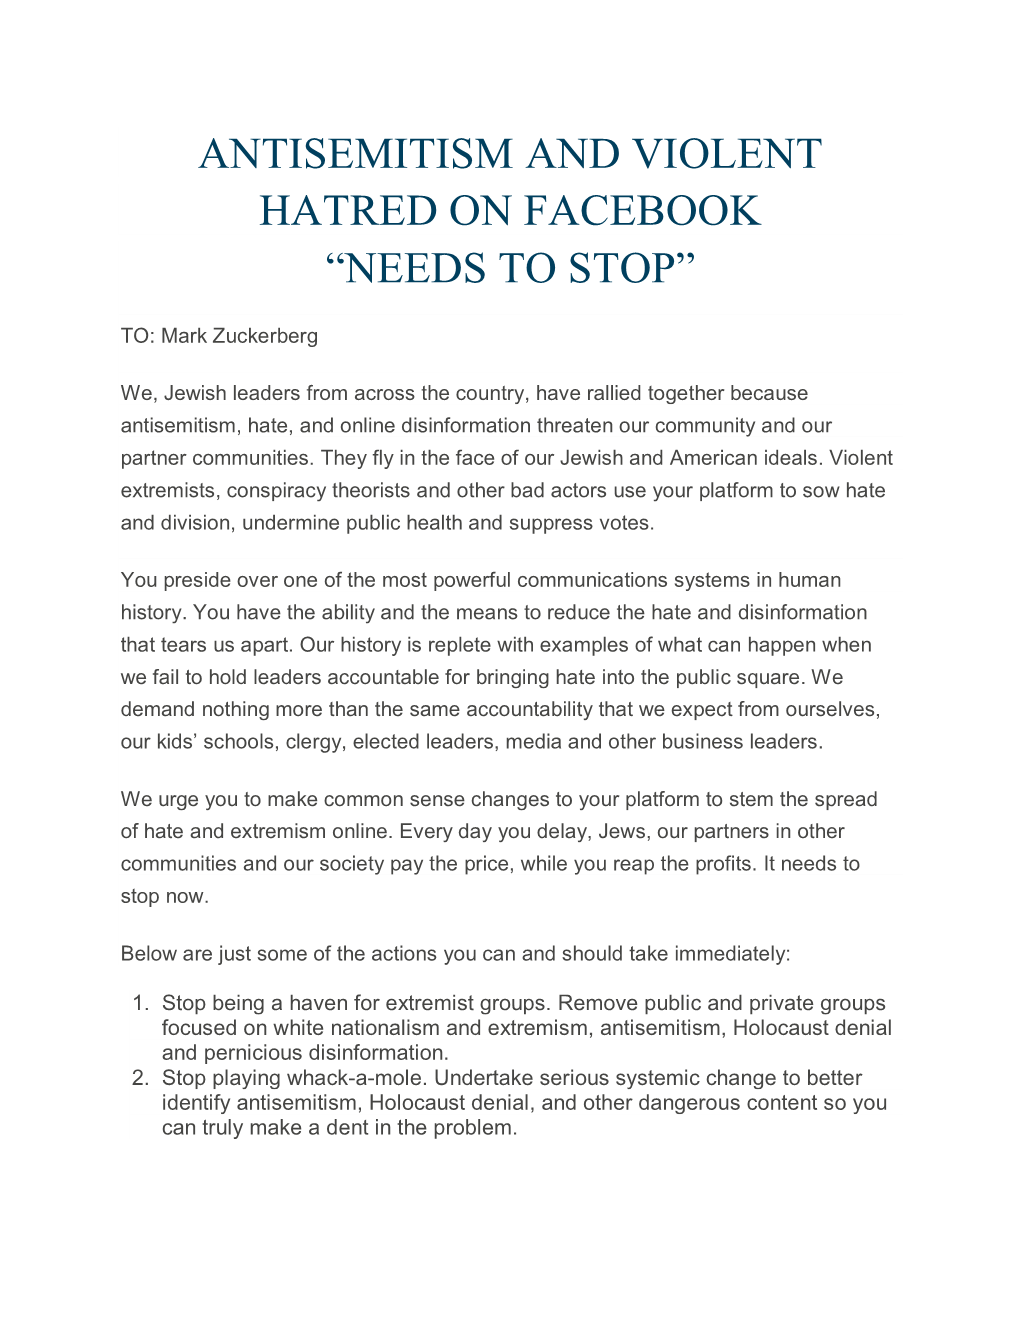 Antisemitism and Violent Hatred on Facebook “Needs to Stop”